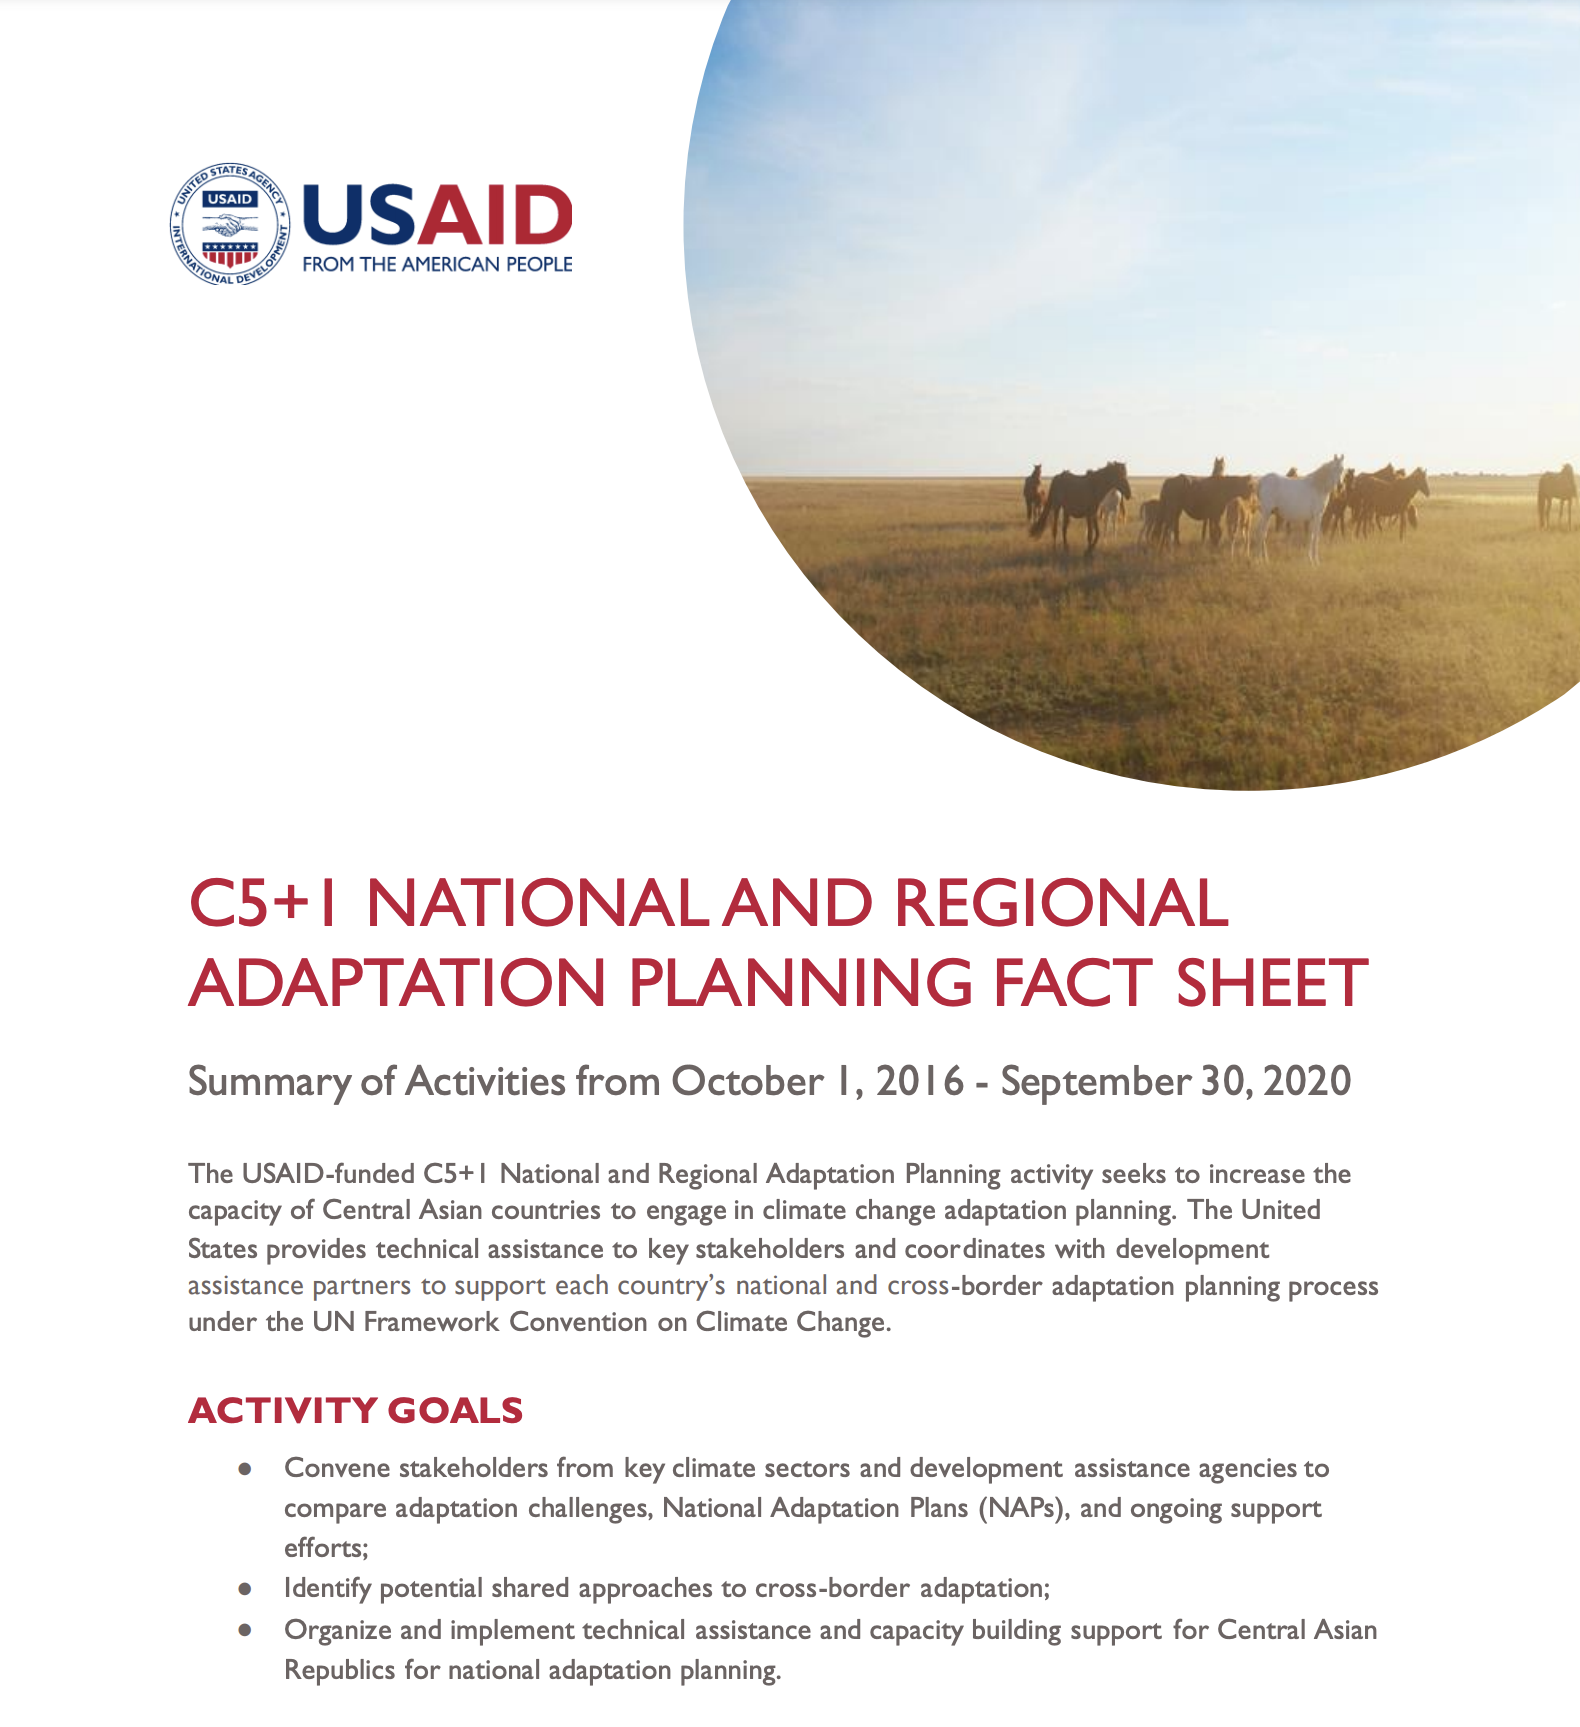 C5+1 National and Regional Adaptation Planning Fact Sheet